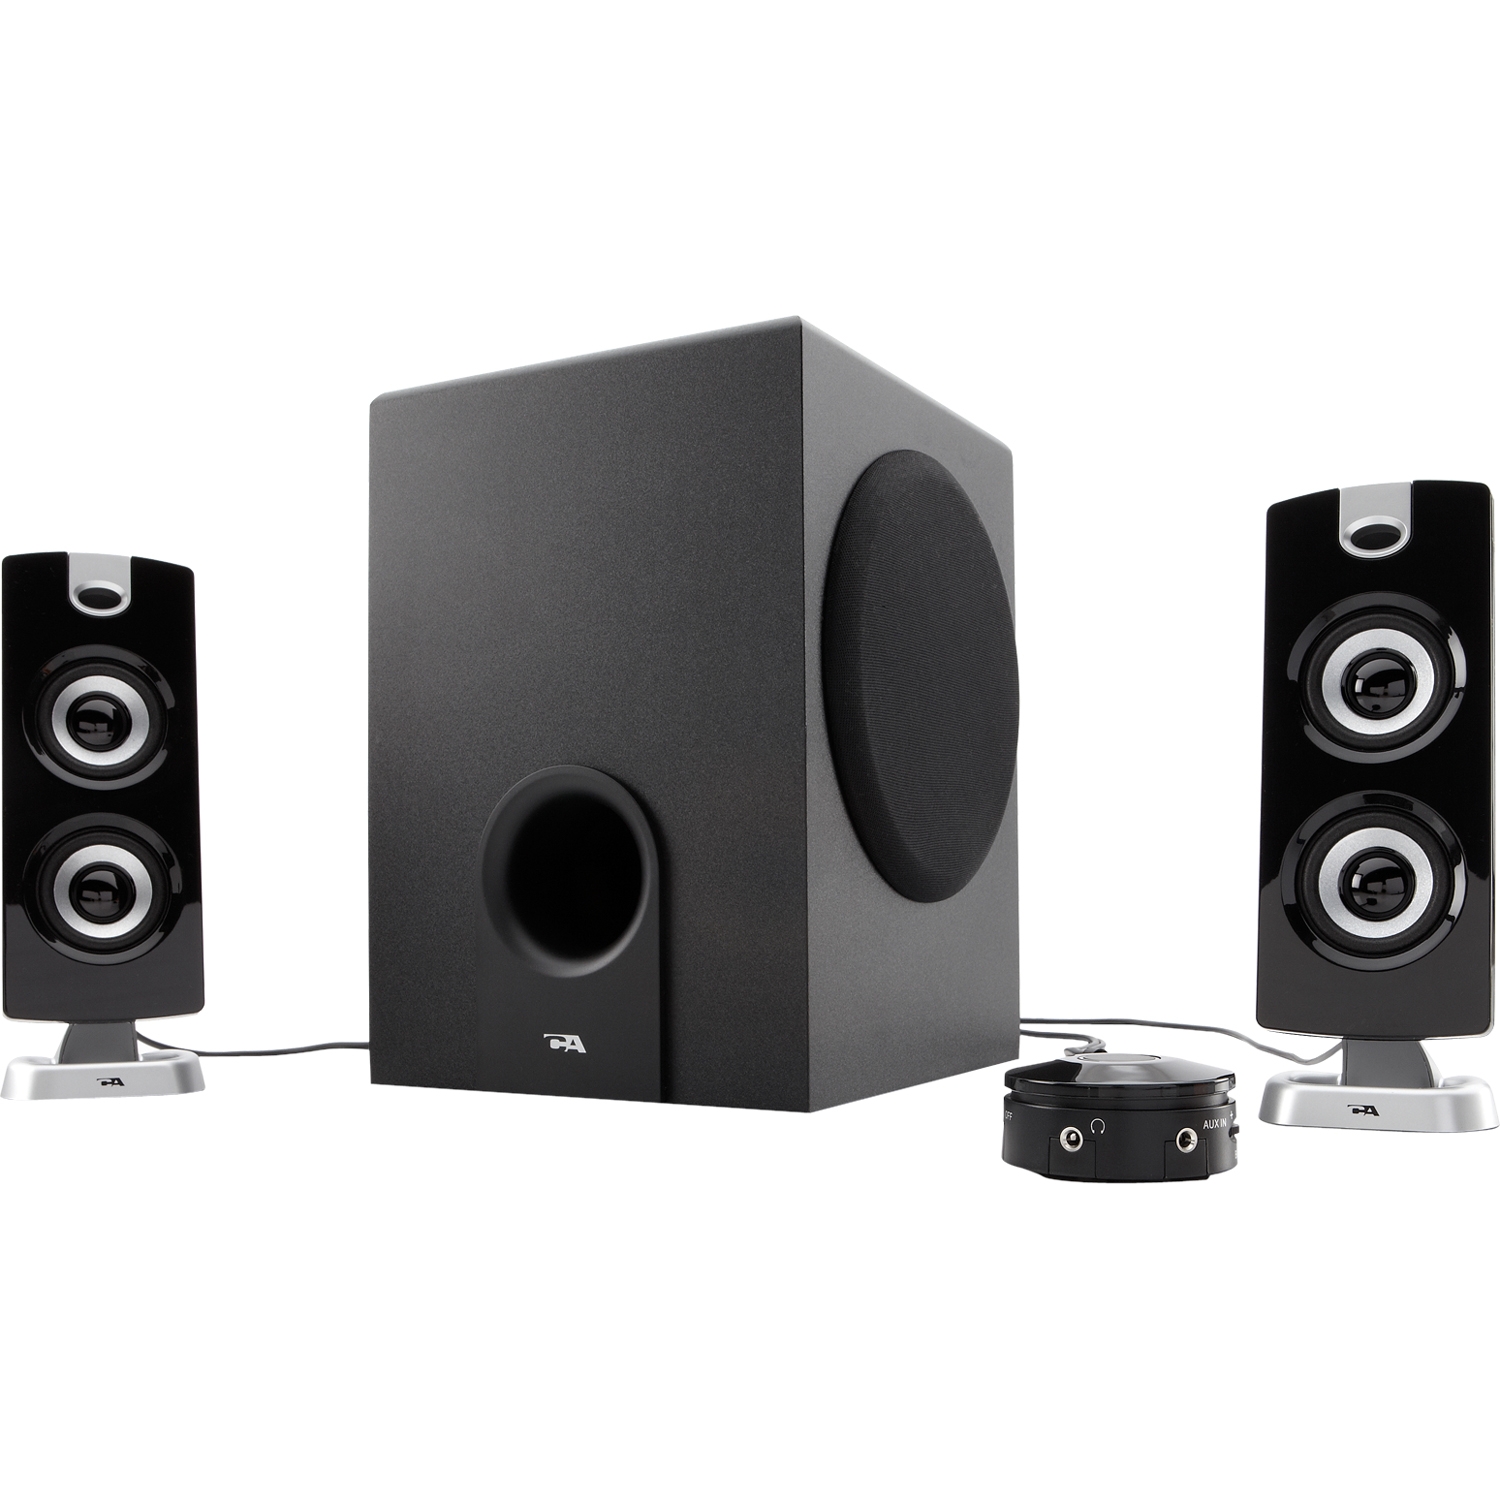 Cyber Acoustics CA-3602 Platinum Speaker System - 2.1-channel - 30W (RMS) / 62W (PMPO) - image 2 of 4